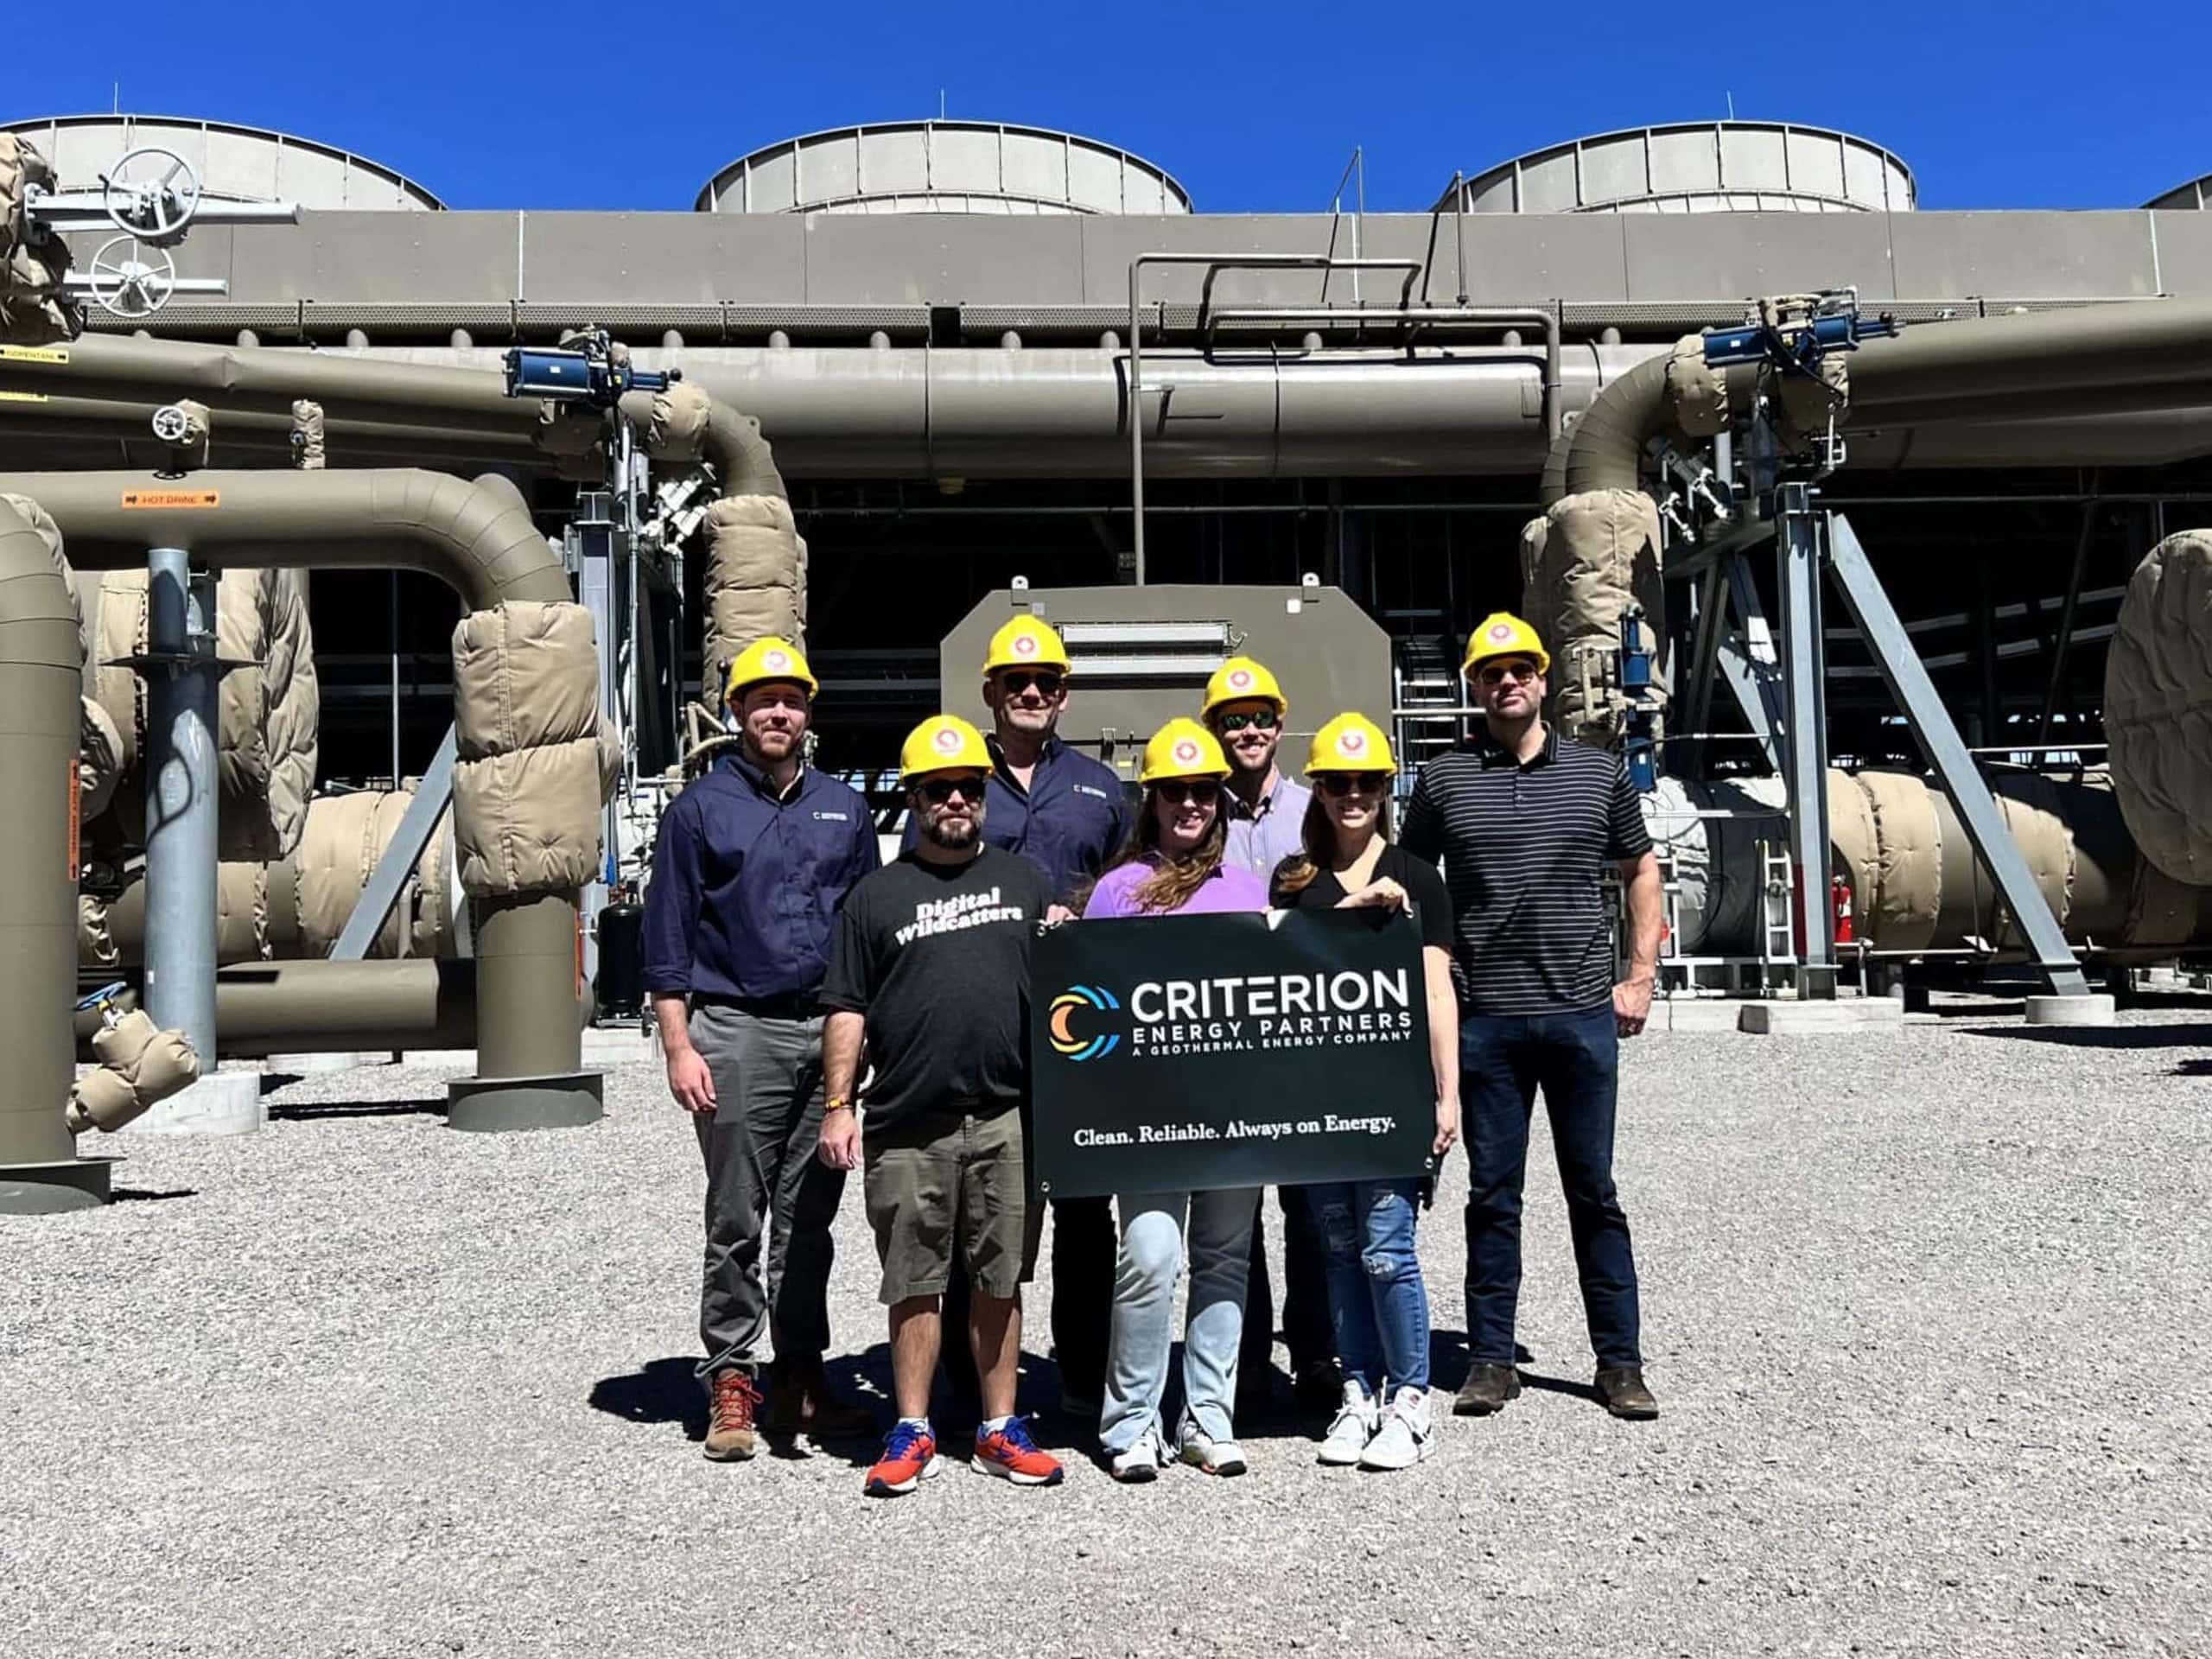 Criterion Energy Partners at Power Plant: Criterion Energy Partners - clean, reliable, always on energy